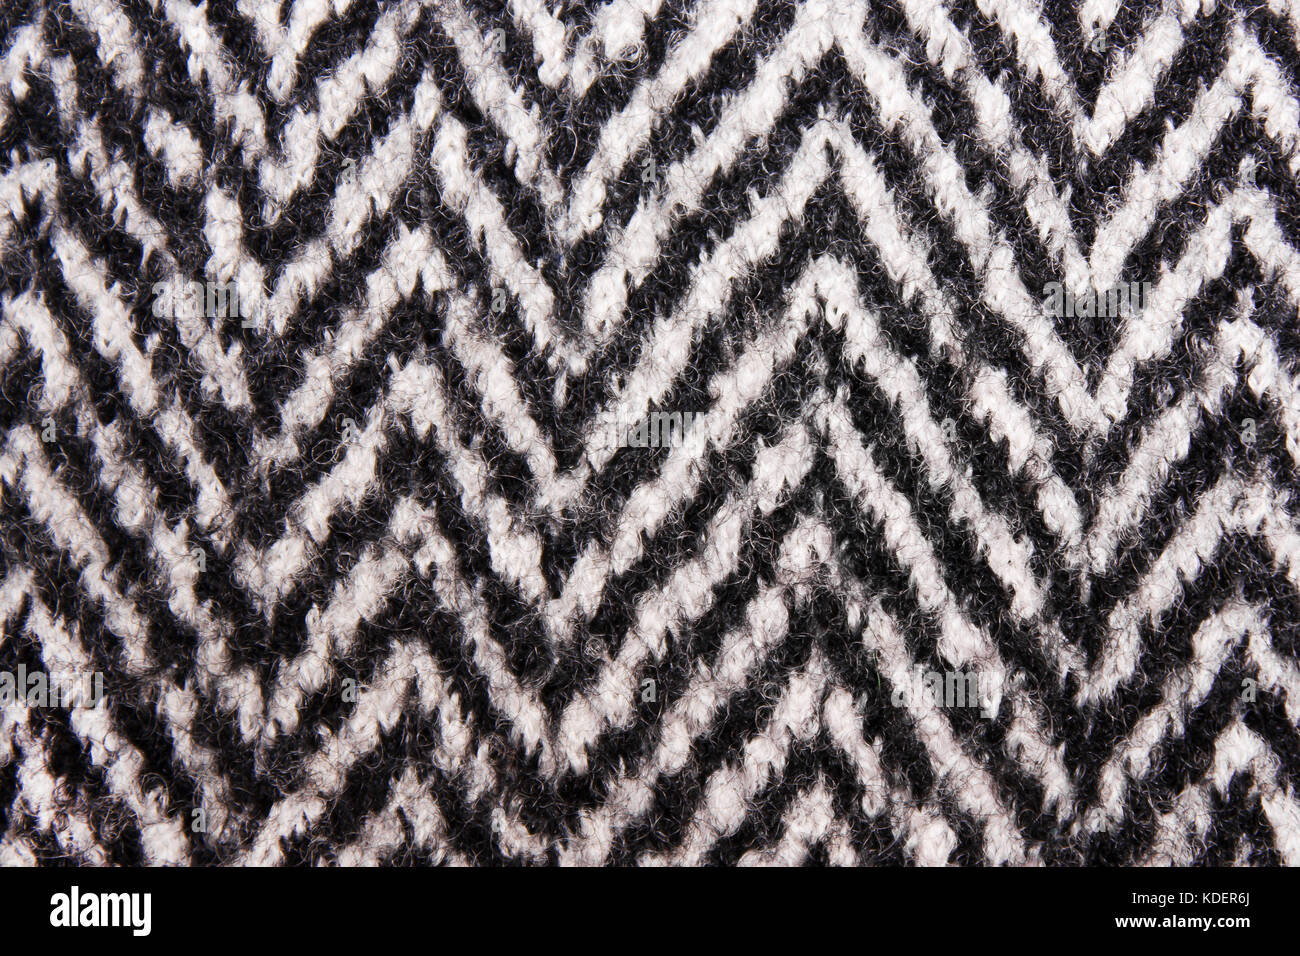 The texture of black and white wool fabric Stock Photo